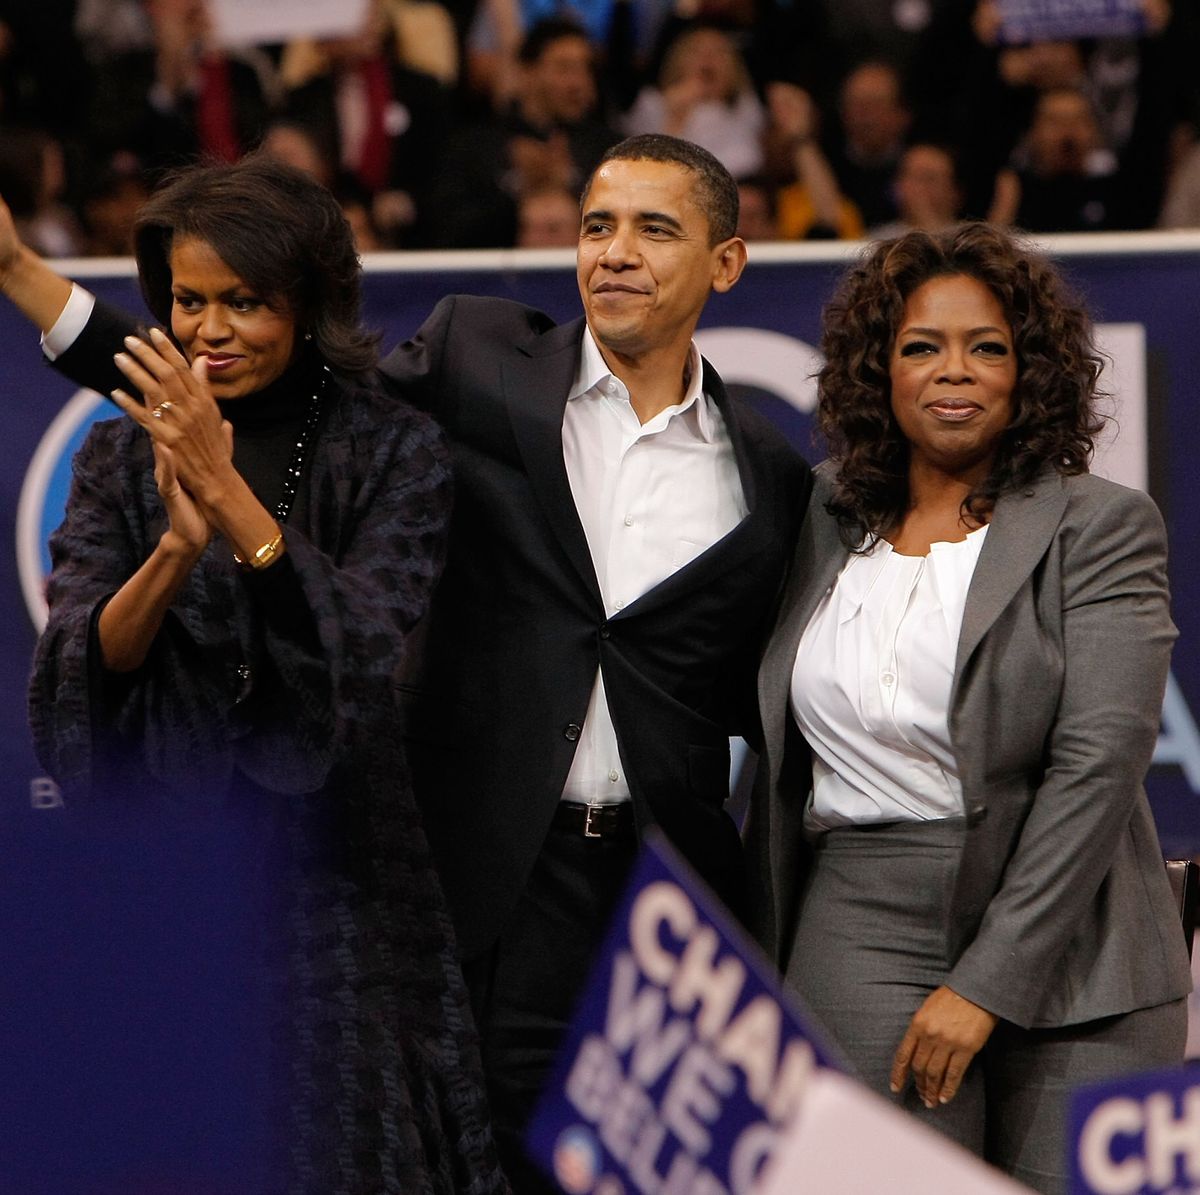 manchester, nh   december 09  presidential candidate barack obama center is joined by special guest oprah winfrey right and his wife michelle obama during a rally held at the verizon wireless arena in manchester, new hampshire on december 9, 2007 in new york city  photo by jemal countesswireimage